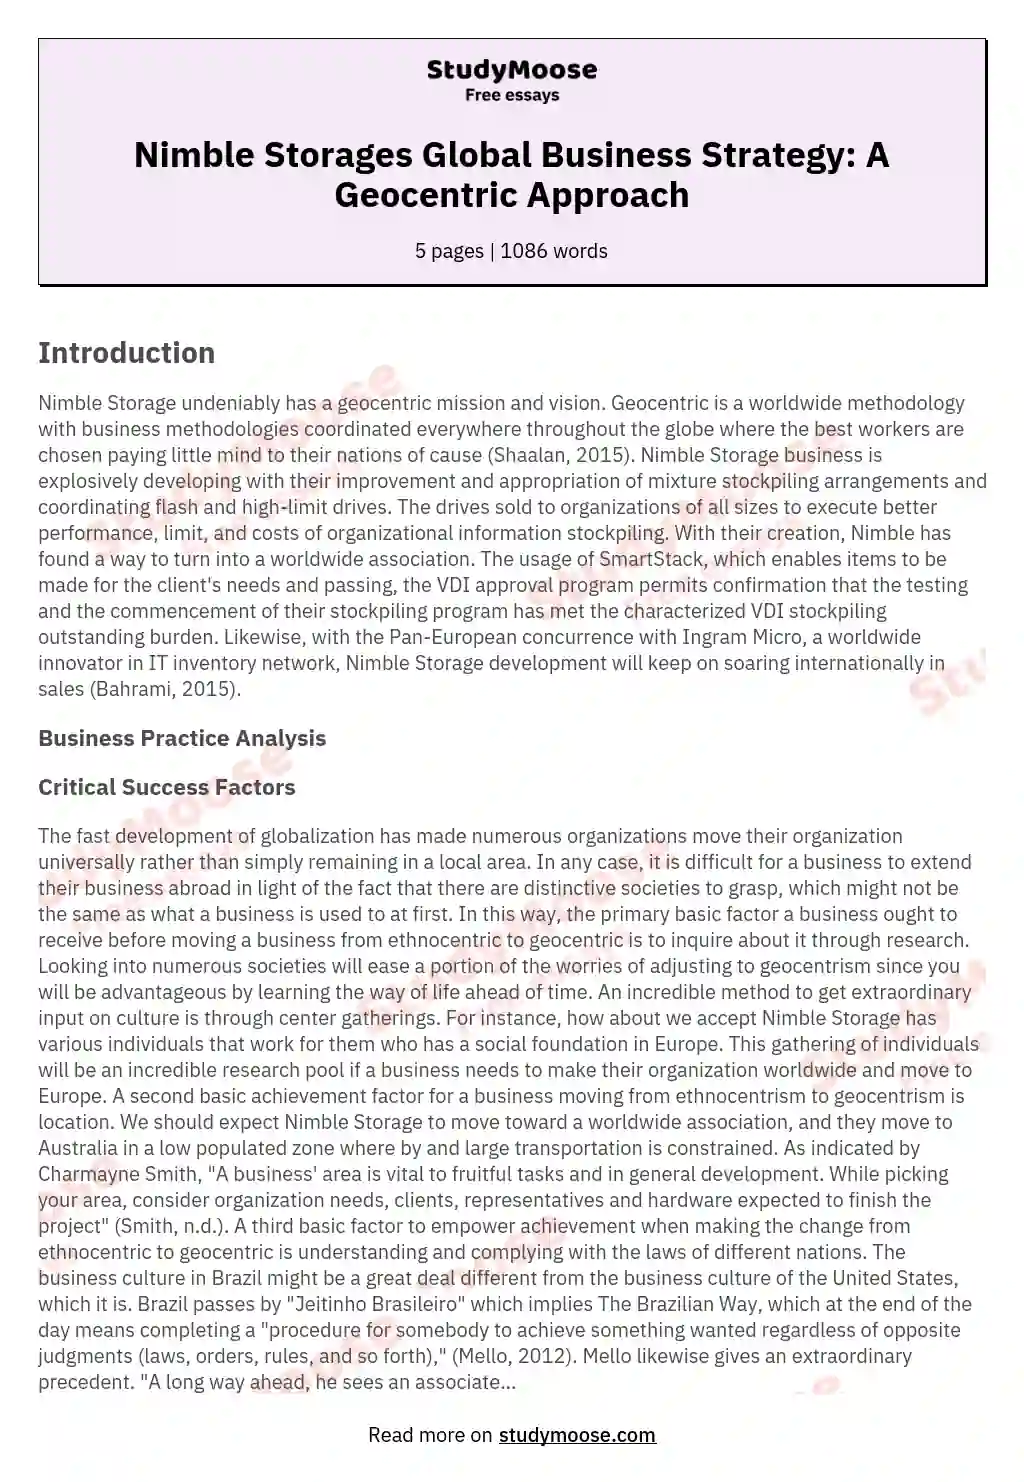 Nimble Storages Global Business Strategy: A Geocentric Approach essay